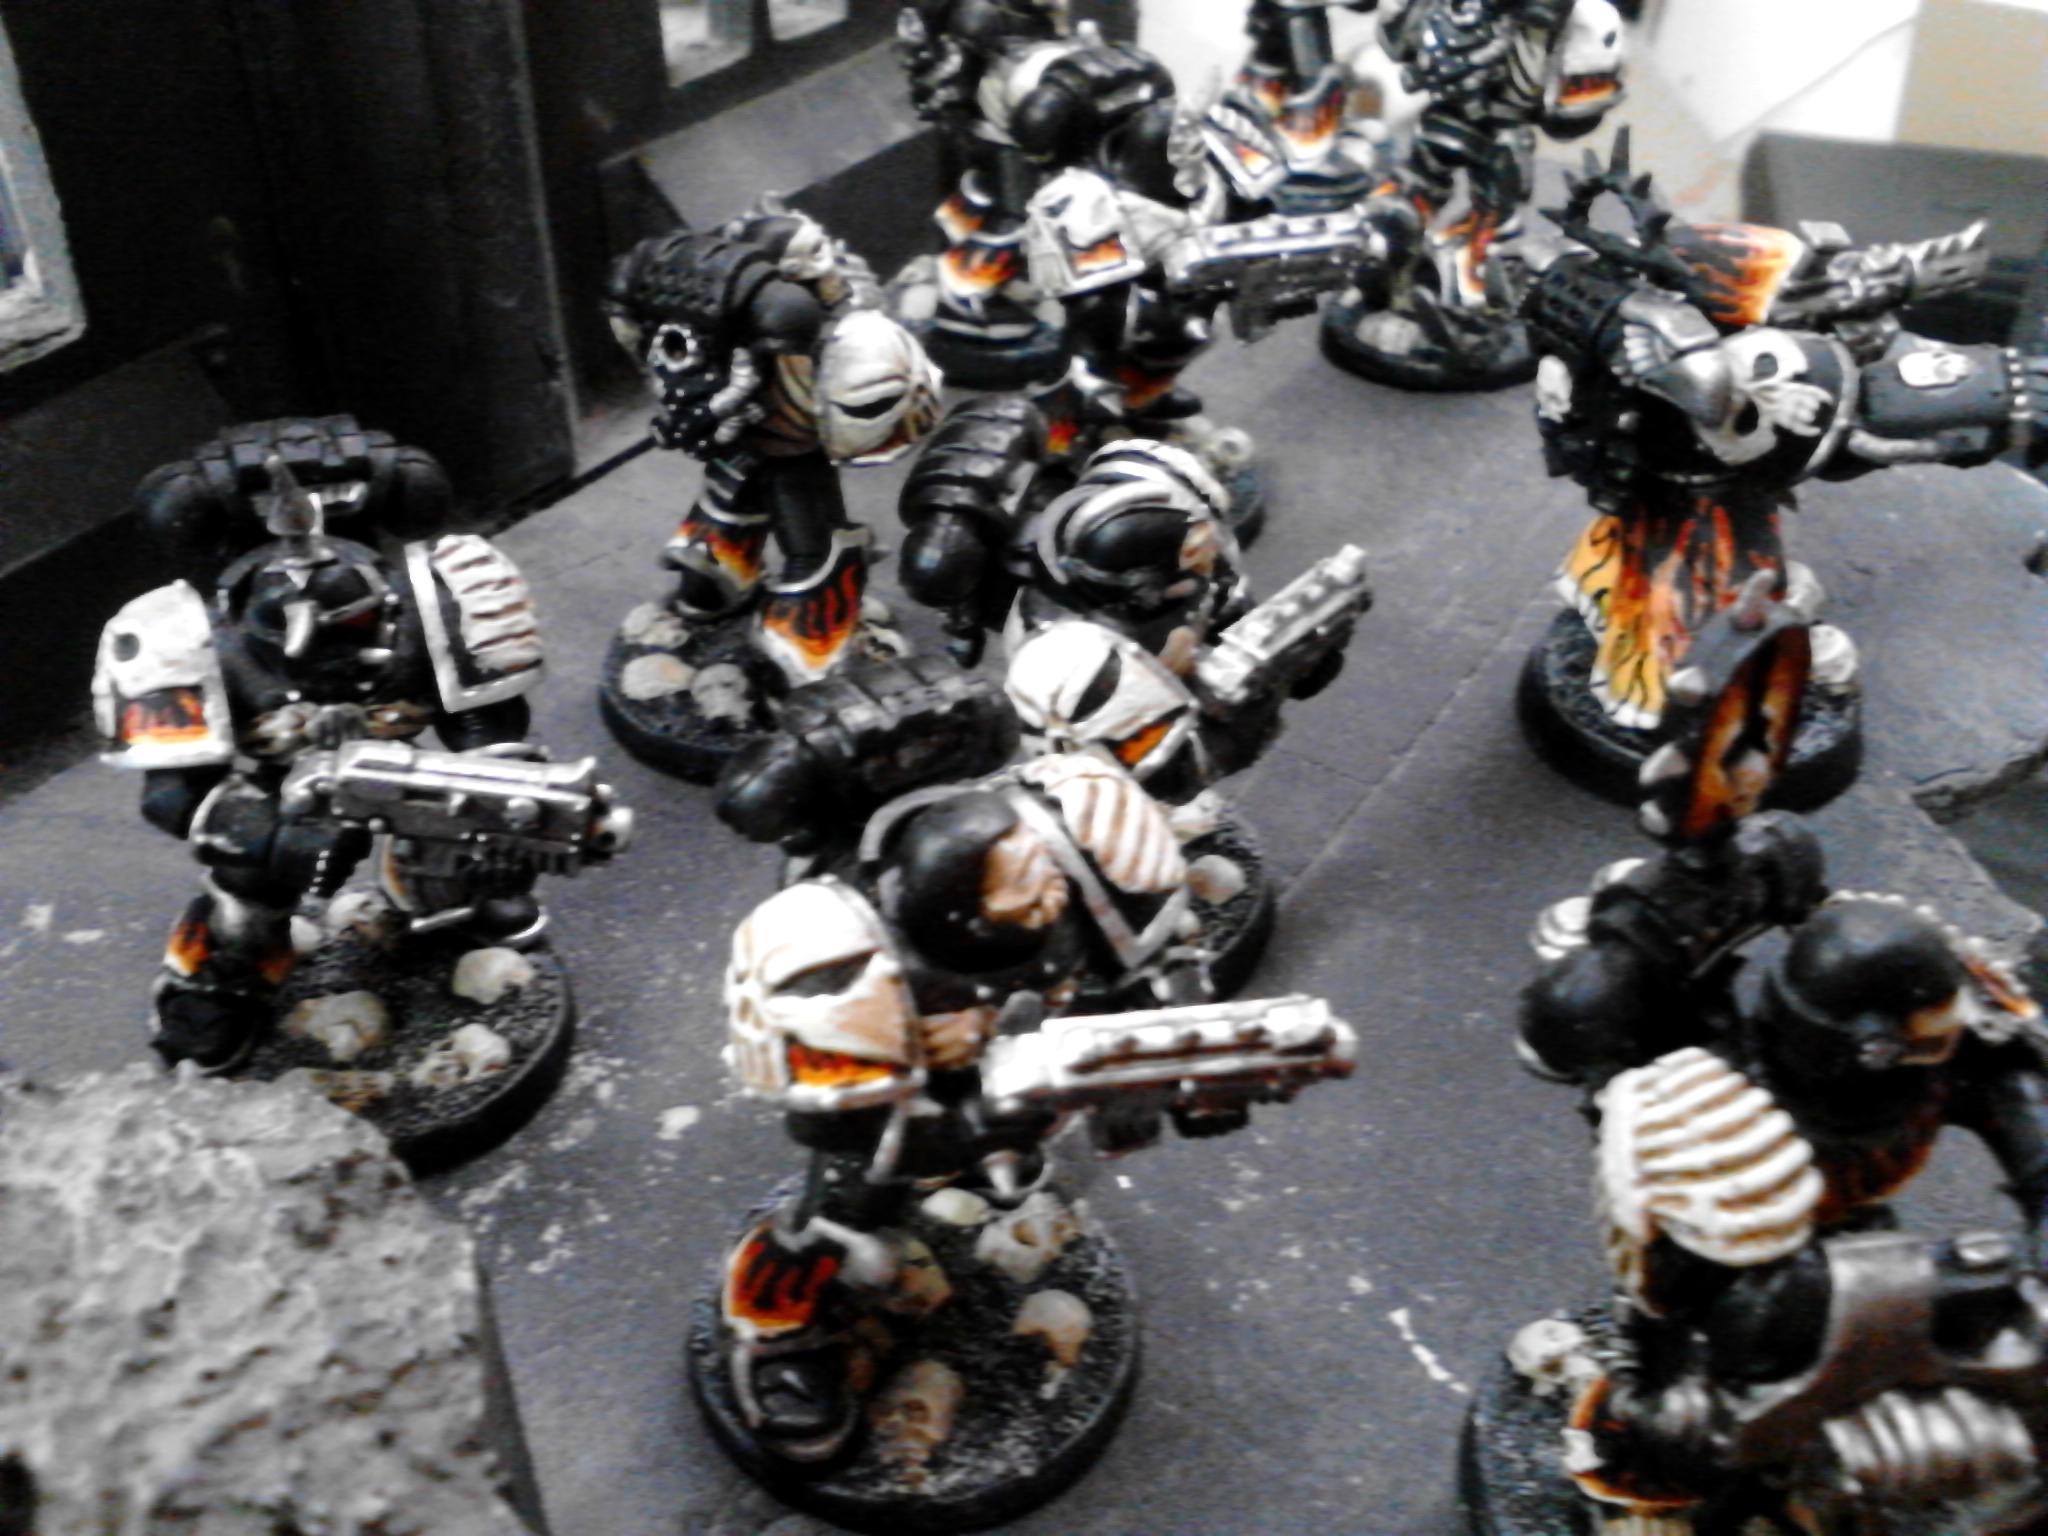 Budget, Elites, Fire, Fire Hawks, Legion Of The Damned, Skull, Space Marines